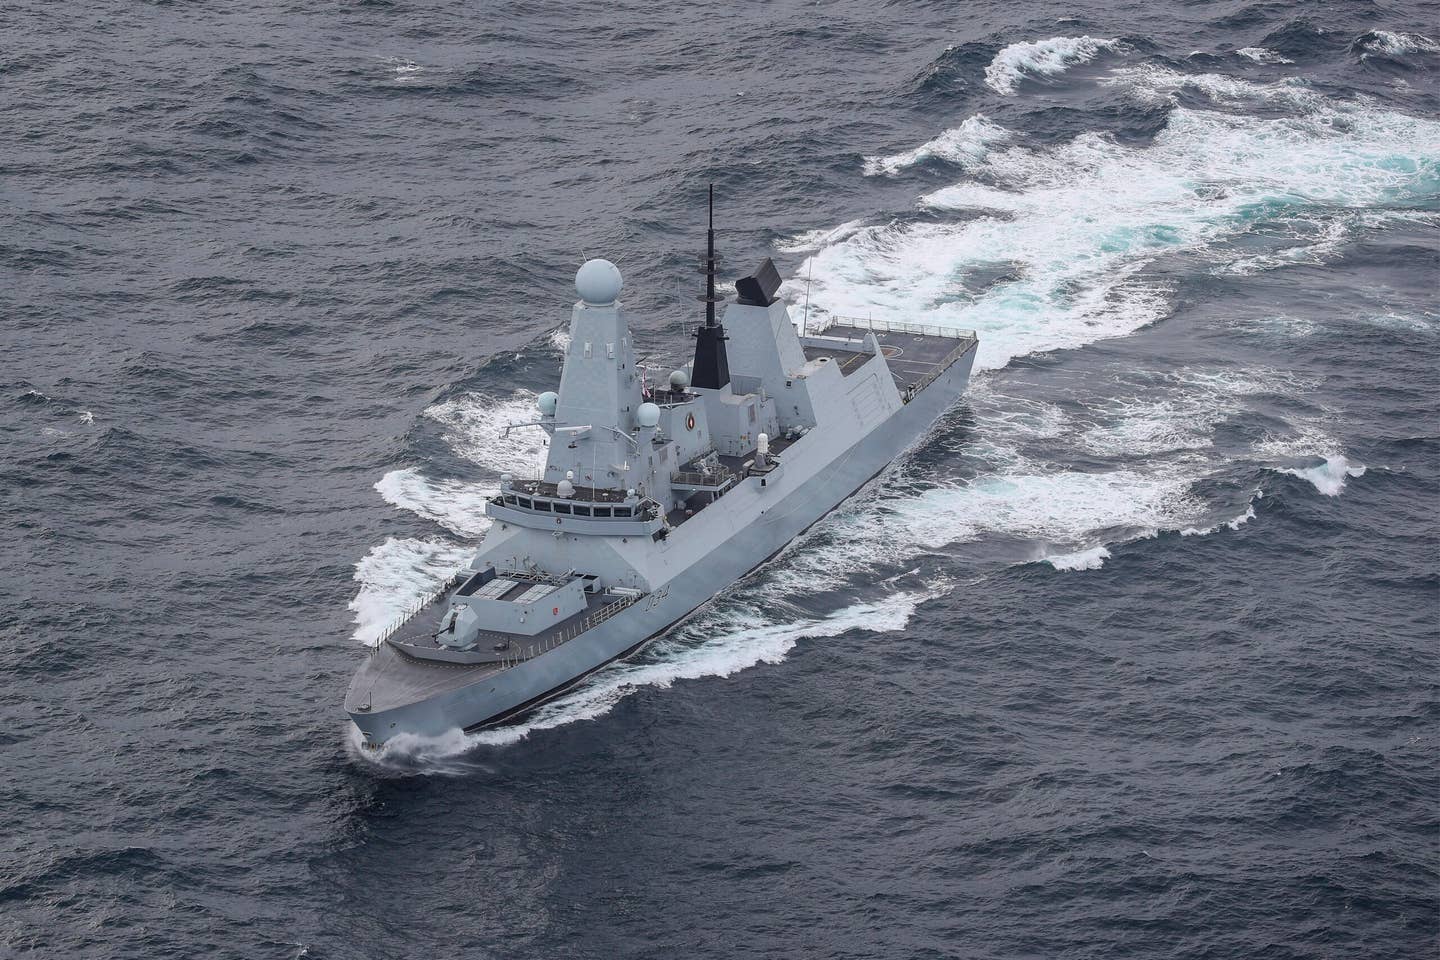 The <em>Type 45 </em>destroyer <em>HMS Diamond</em> downed a drone fired from Houthi-controlled Yemen, according to Defense Secretary Grant Shapps. (U.K. Defense Ministry photo)